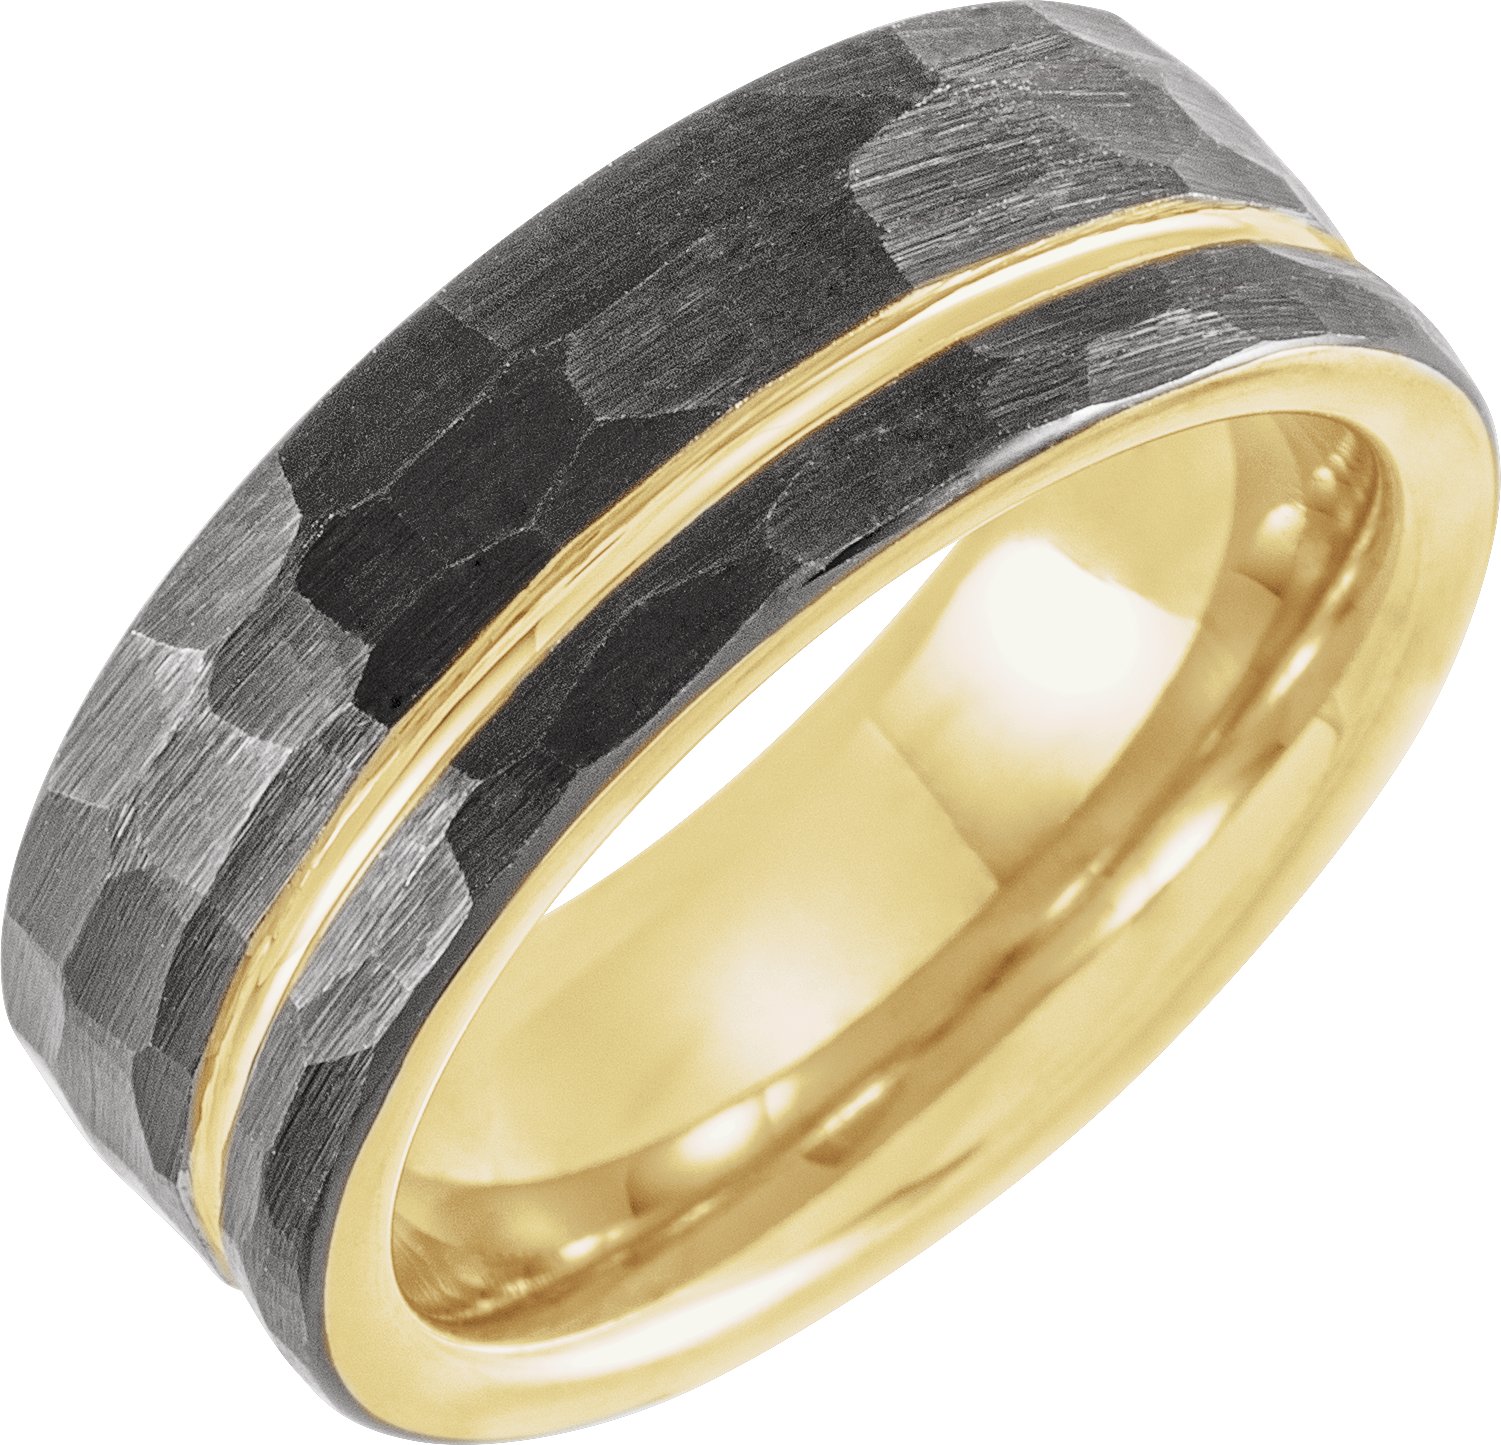 18K Yellow Gold PVD & Black PVD Tungsten 8 mm Flat Grooved Hammered Band Size 11.5